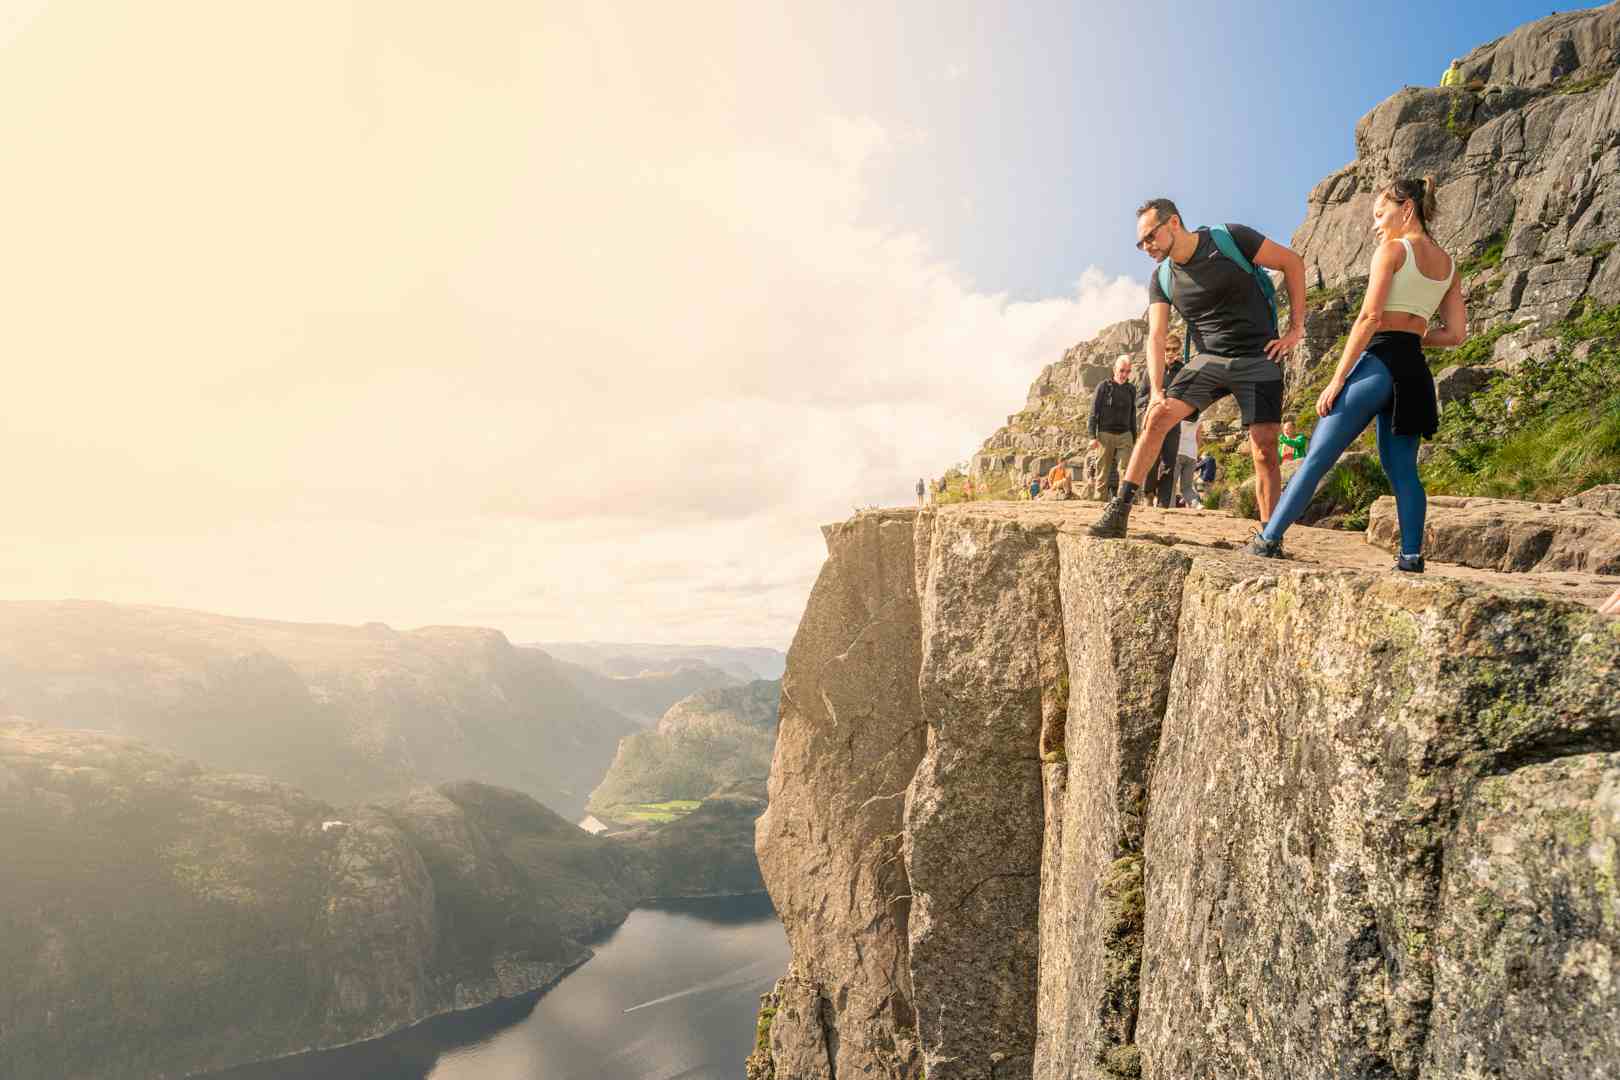 Scenic view of the Pulpit Rock/Preikestolen in Norway, with Lysefjorden in the background.